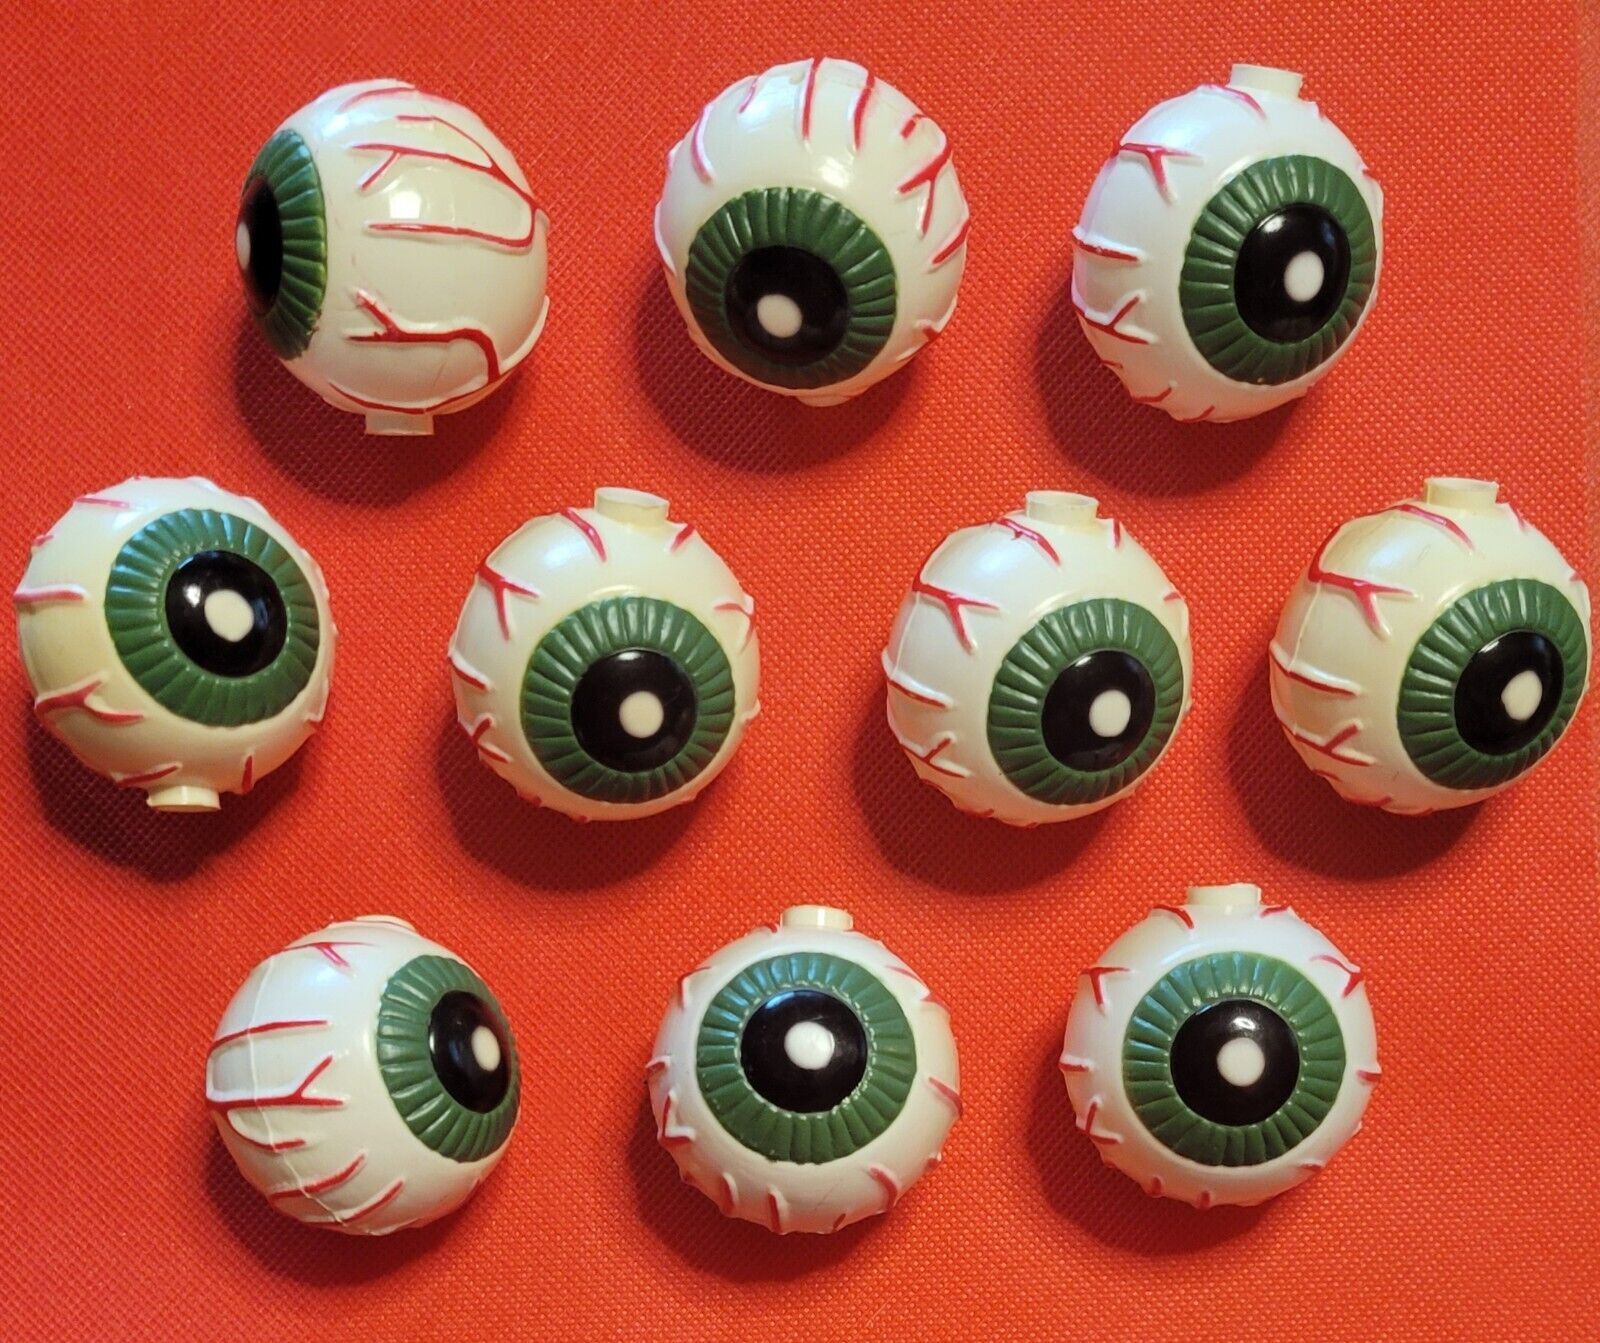 Set of 10 Vintage 1990s Halloween Eyeball String Light Covers Replacement